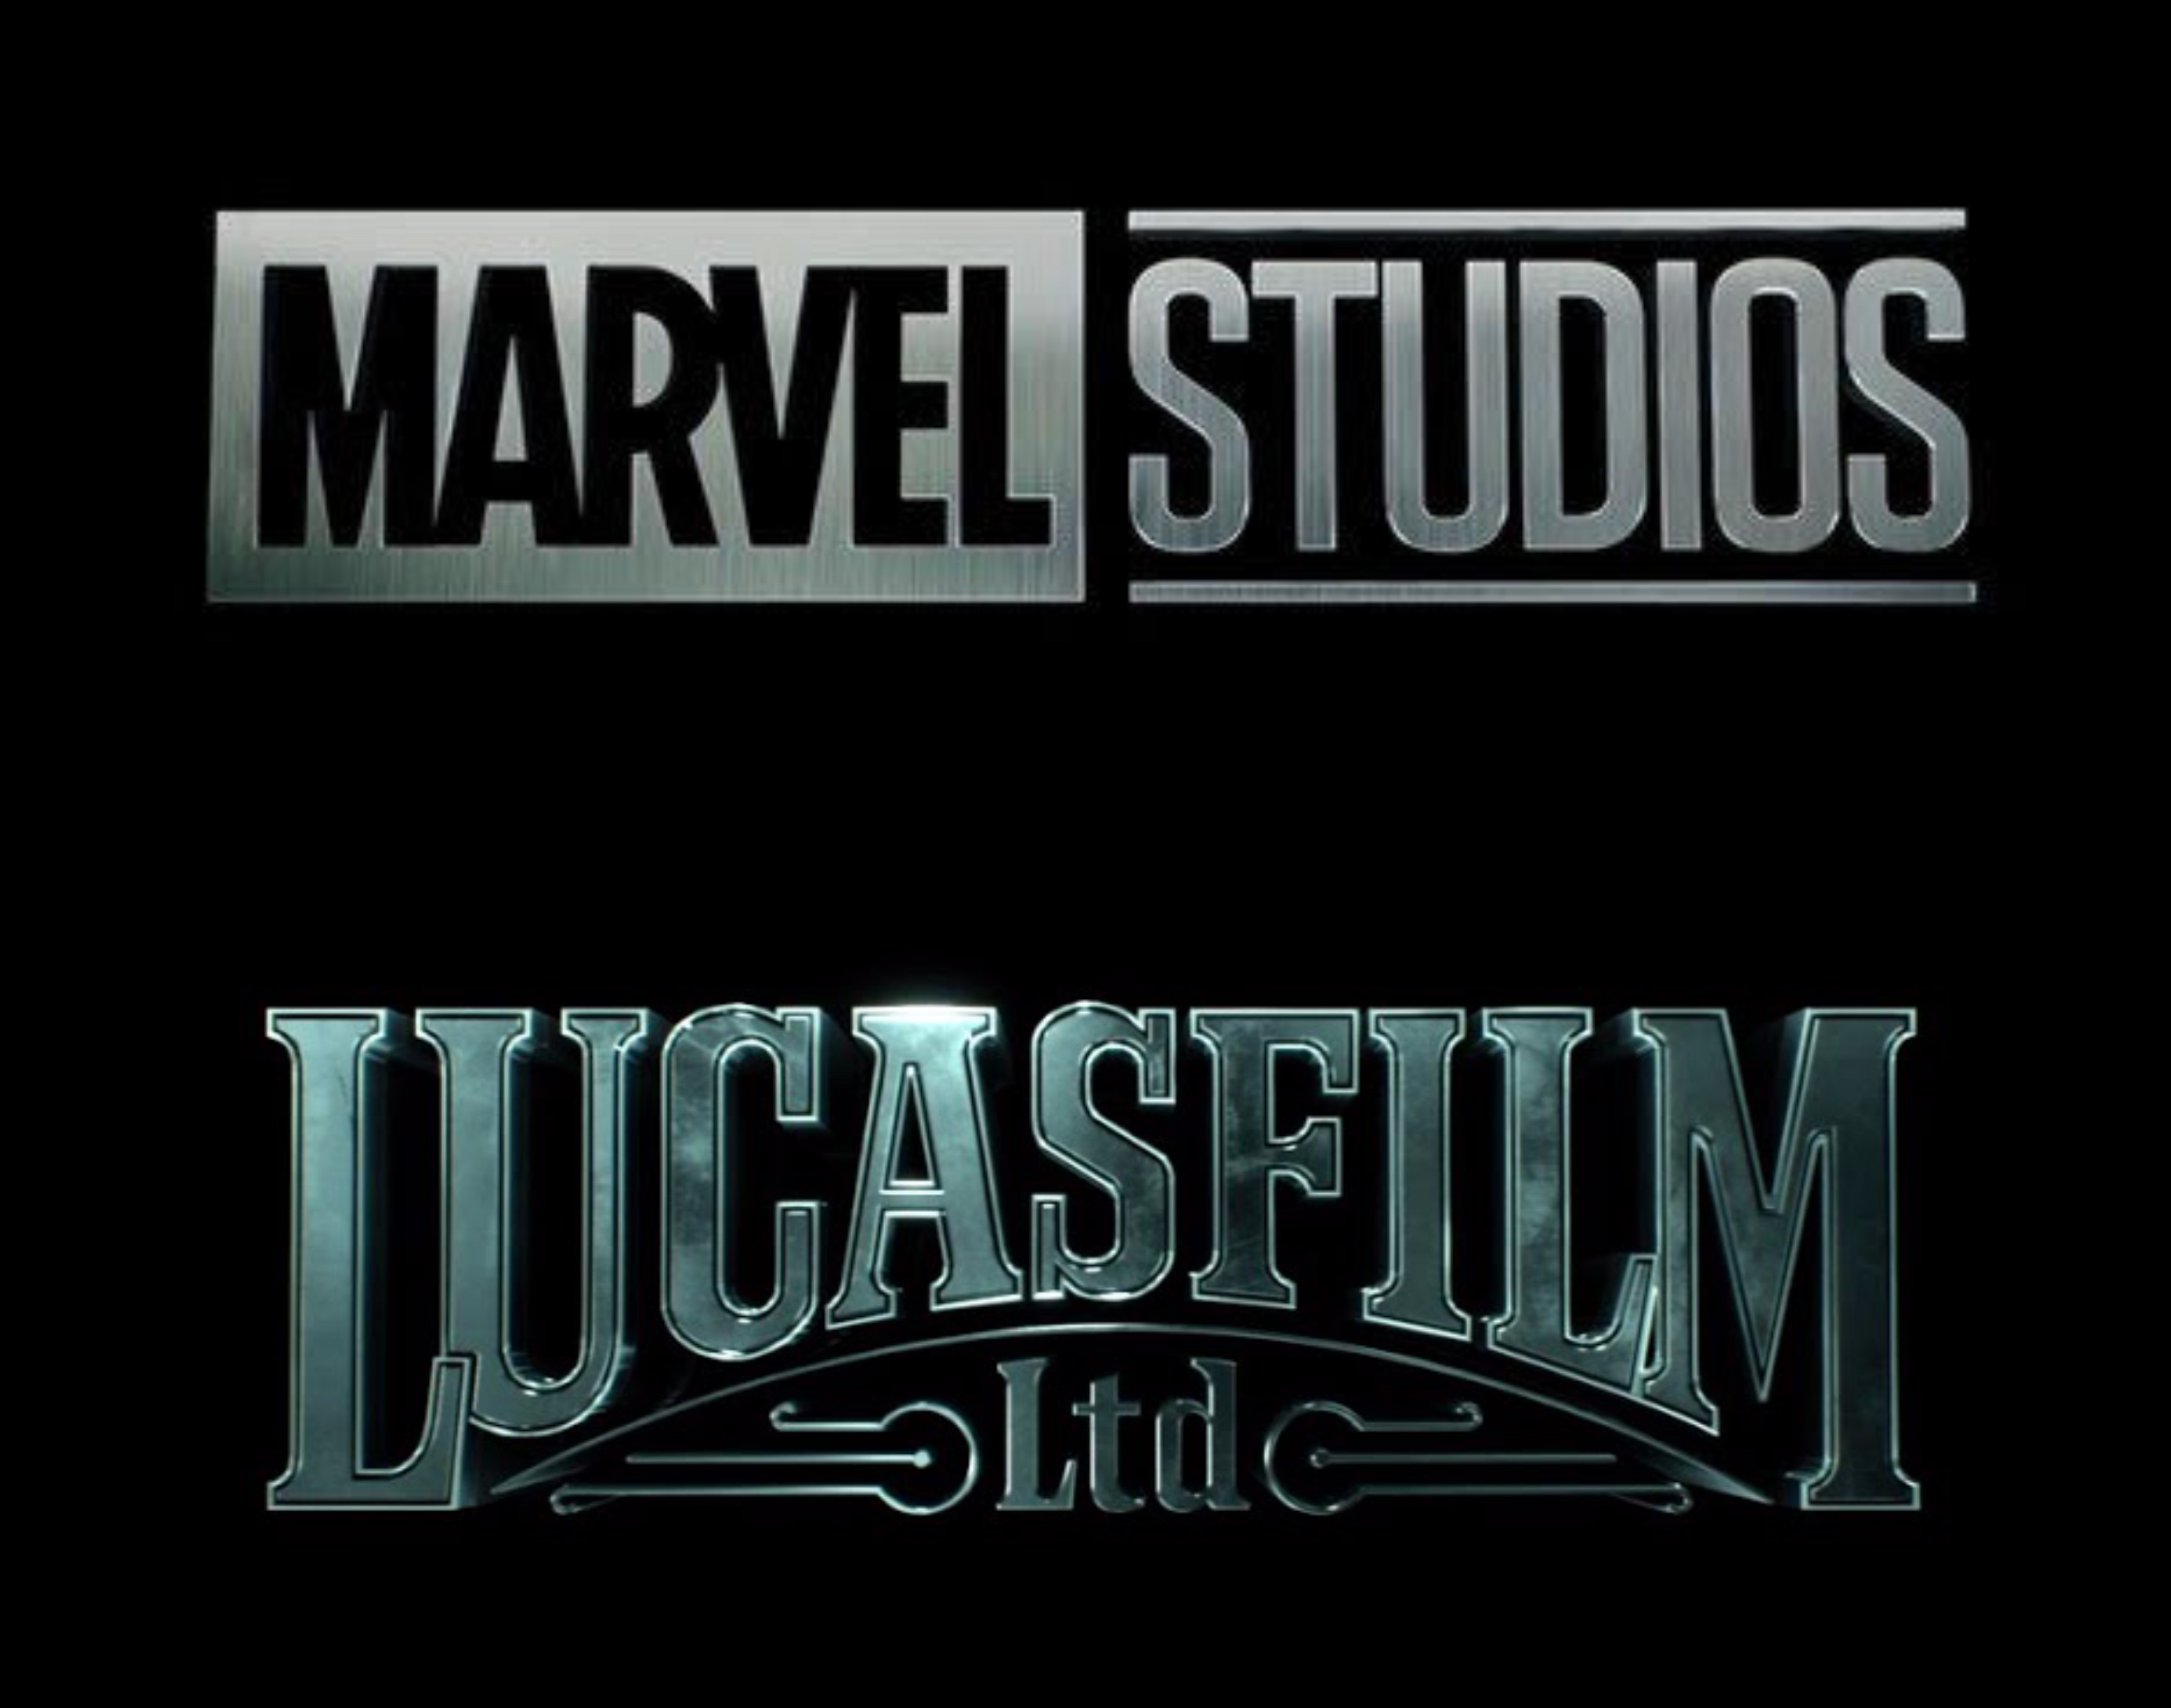 Marvel Studios Kevin Feige Producing New Star Wars Story for Lucasfilm